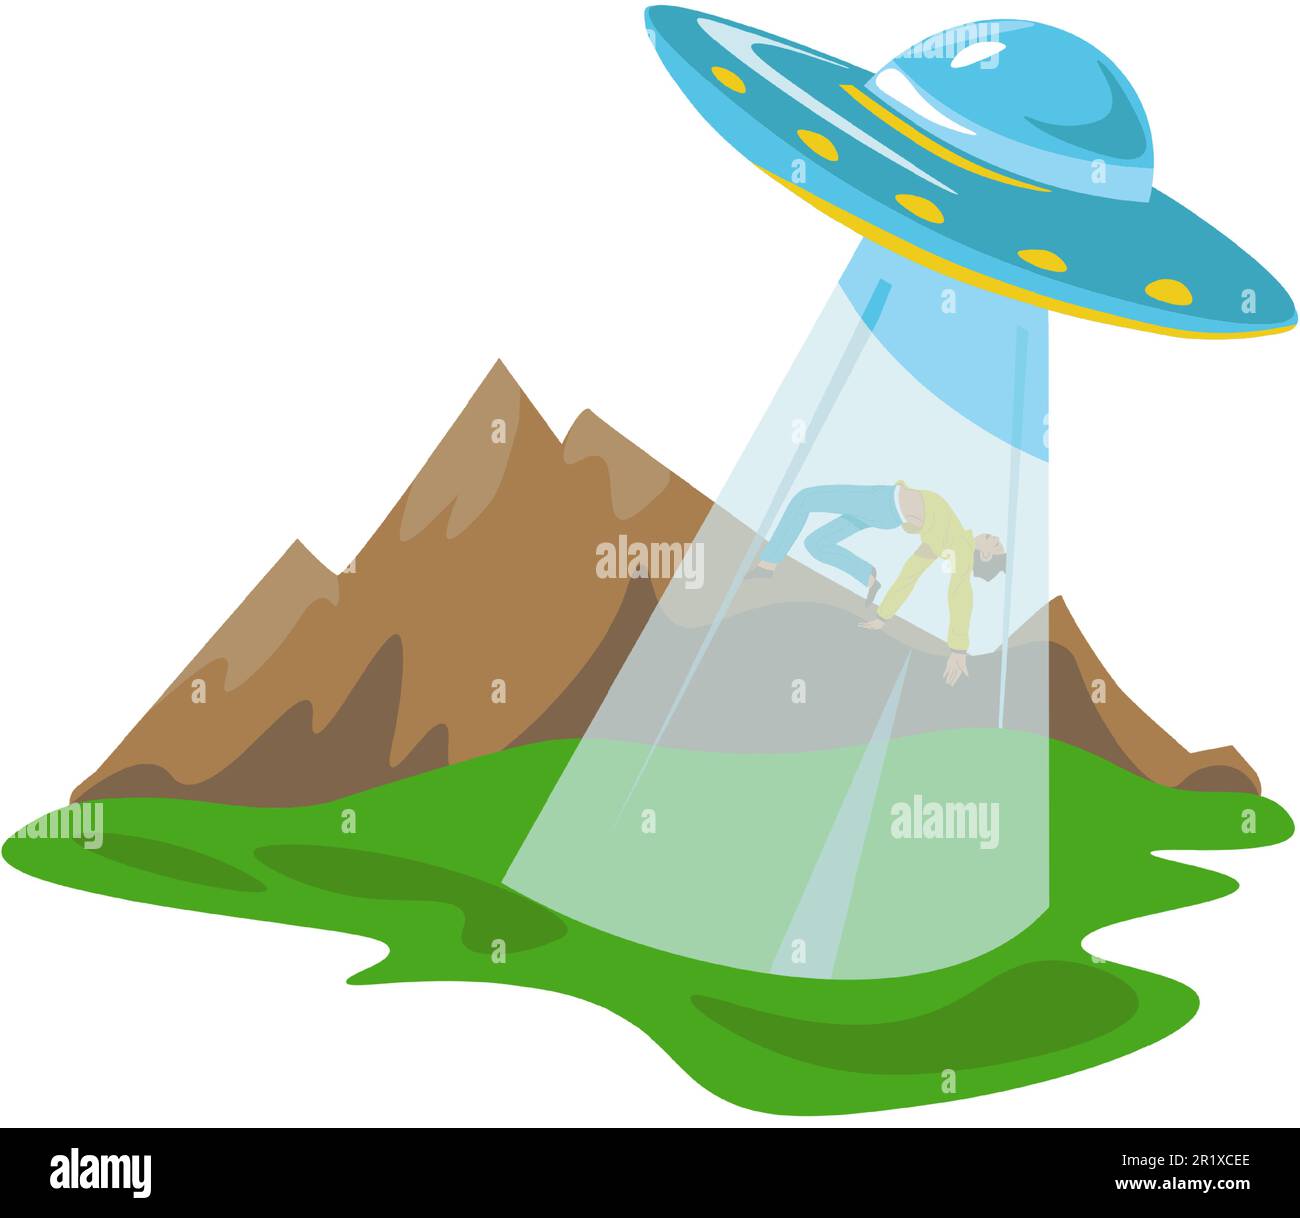 Conspiracy theory, aliens abducting people vector Stock Vector